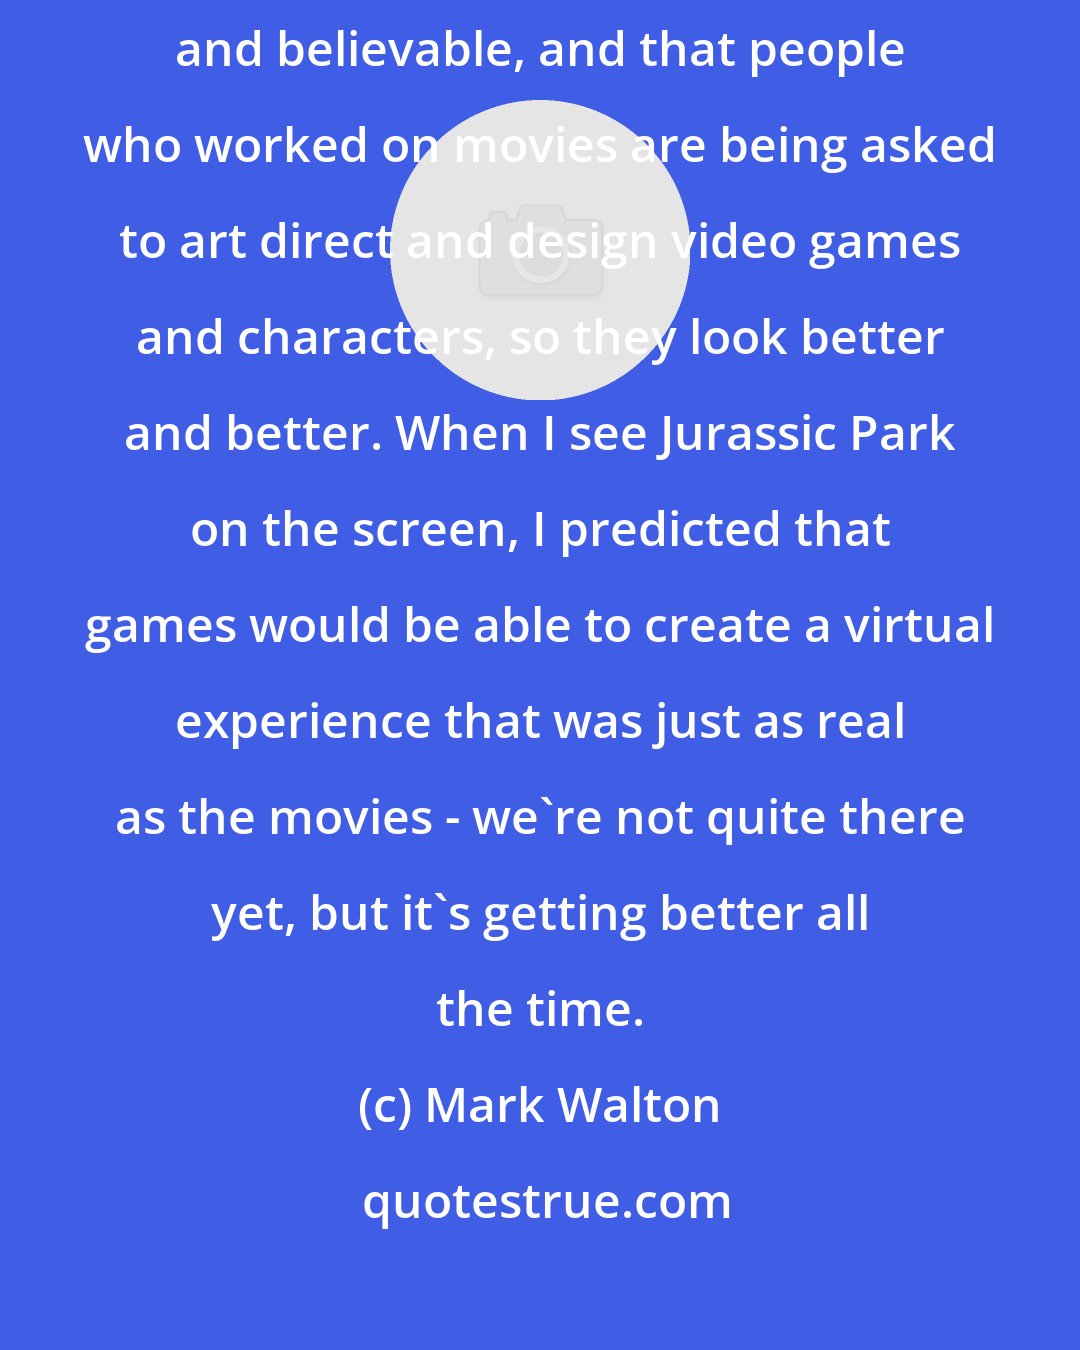 Mark Walton: I think it's really cool that videogames are getting more and more sophisticated and believable, and that people who worked on movies are being asked to art direct and design video games and characters, so they look better and better. When I see Jurassic Park on the screen, I predicted that games would be able to create a virtual experience that was just as real as the movies - we're not quite there yet, but it's getting better all the time.